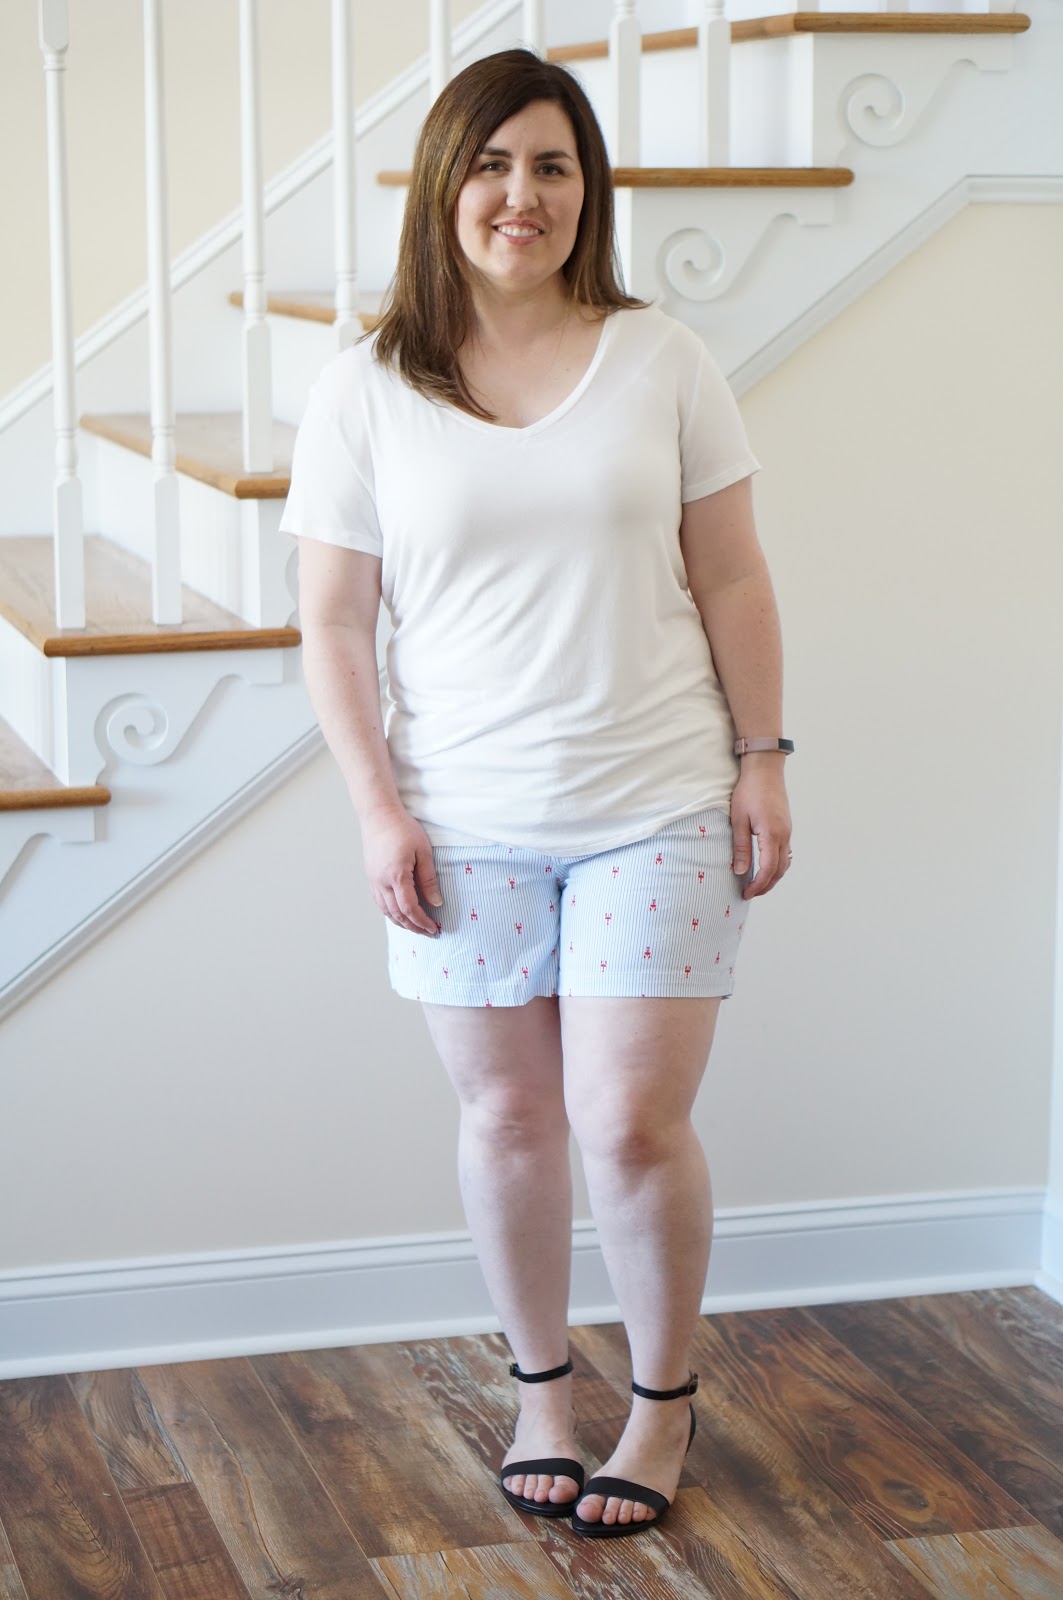 Popular North Carolina style blogger Rebecca Lately shares her Stitch Fix outfits for May 2018.  Click here to see what she got & what she thought!